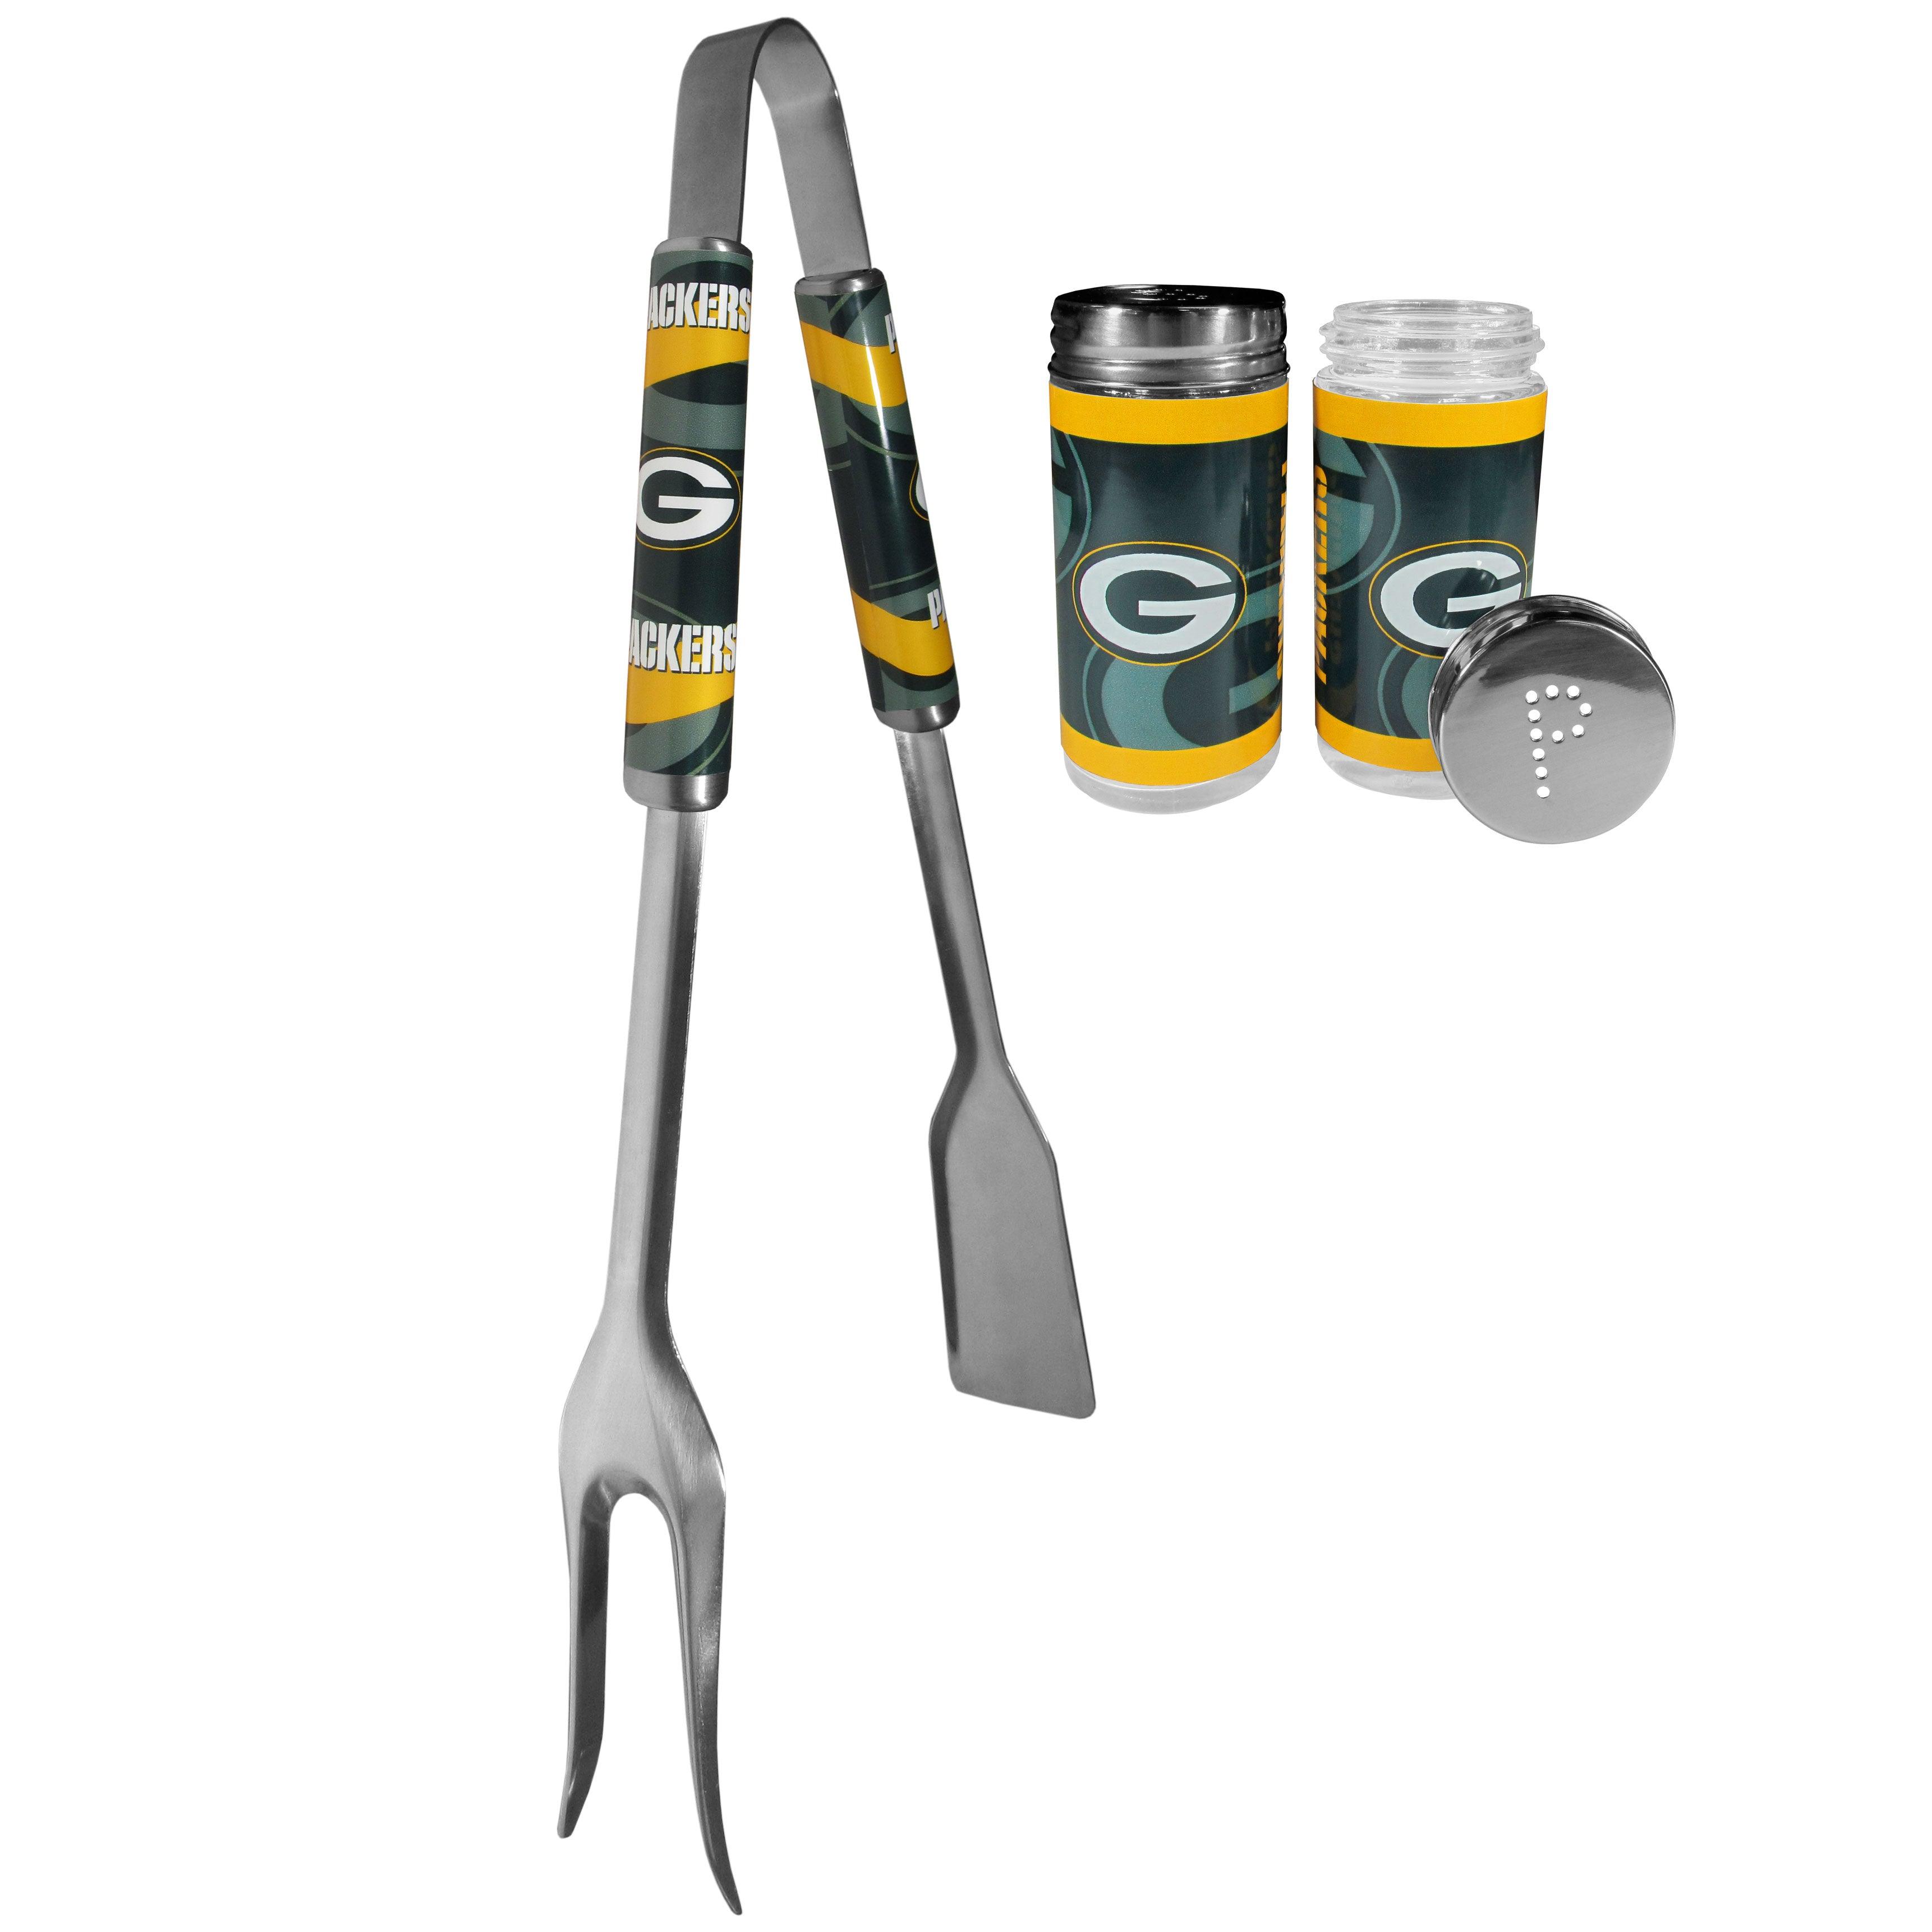 Green Bay Packers 3 in 1 BBQ Tool and Season Shaker - Flyclothing LLC